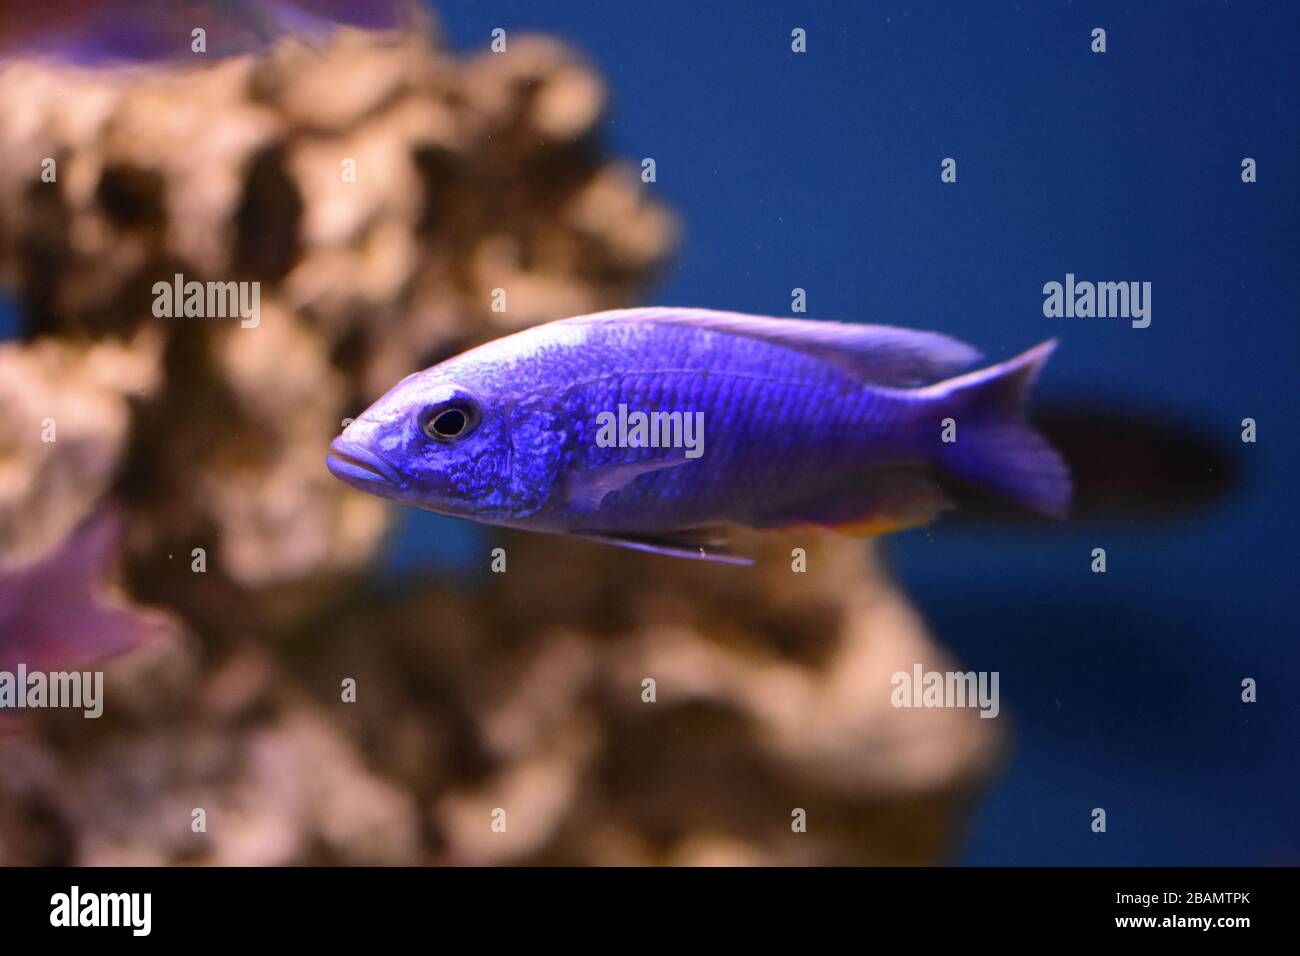 Freshwater aquarium fish, endemic cichlid fish from African lake and south american rivers Stock Photo